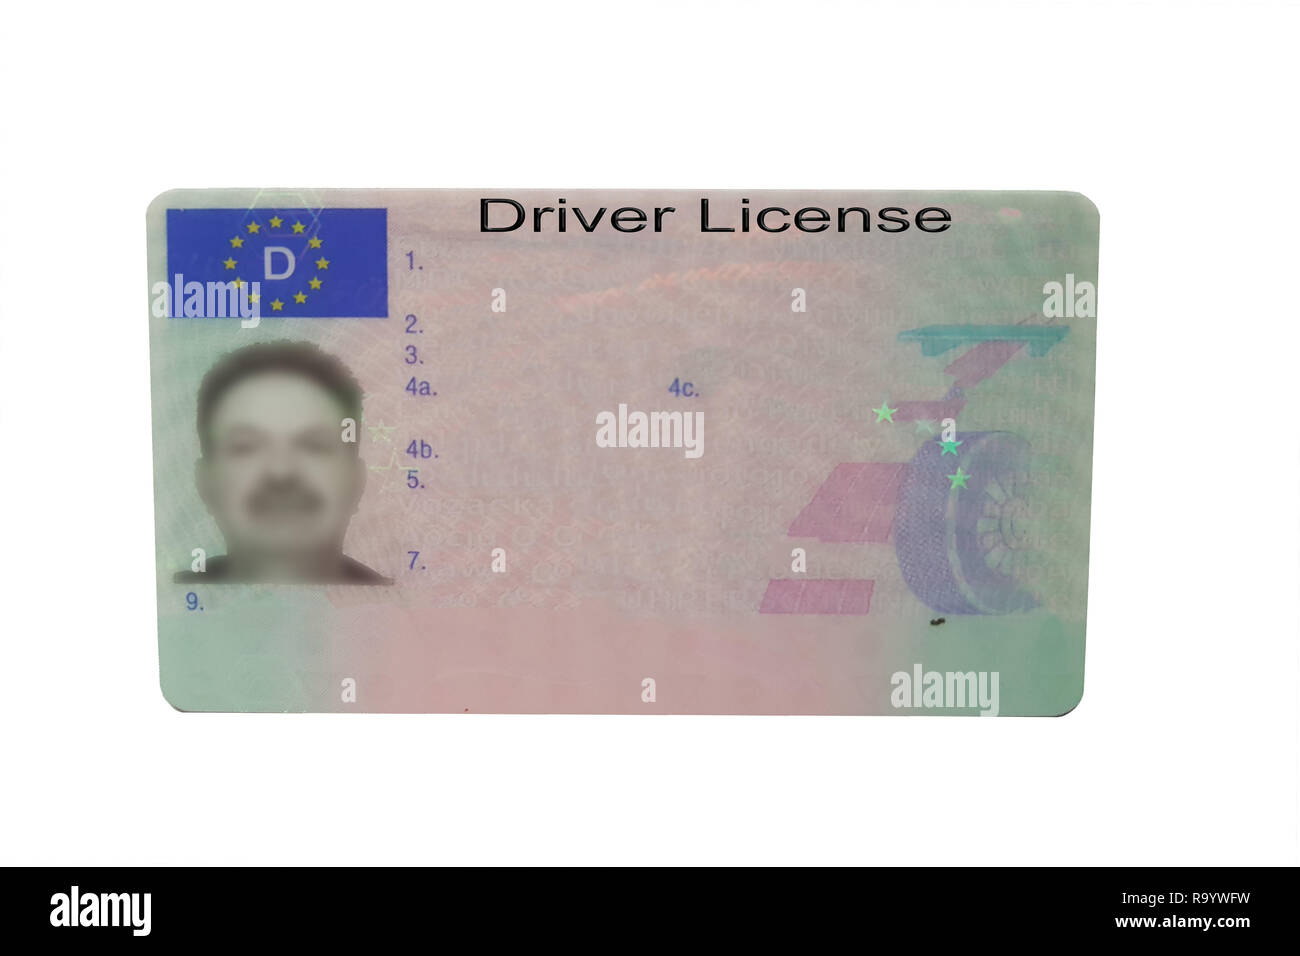 Driving license identity card isolated. Plastic ticket of flat driver license in Germany Stock Photo